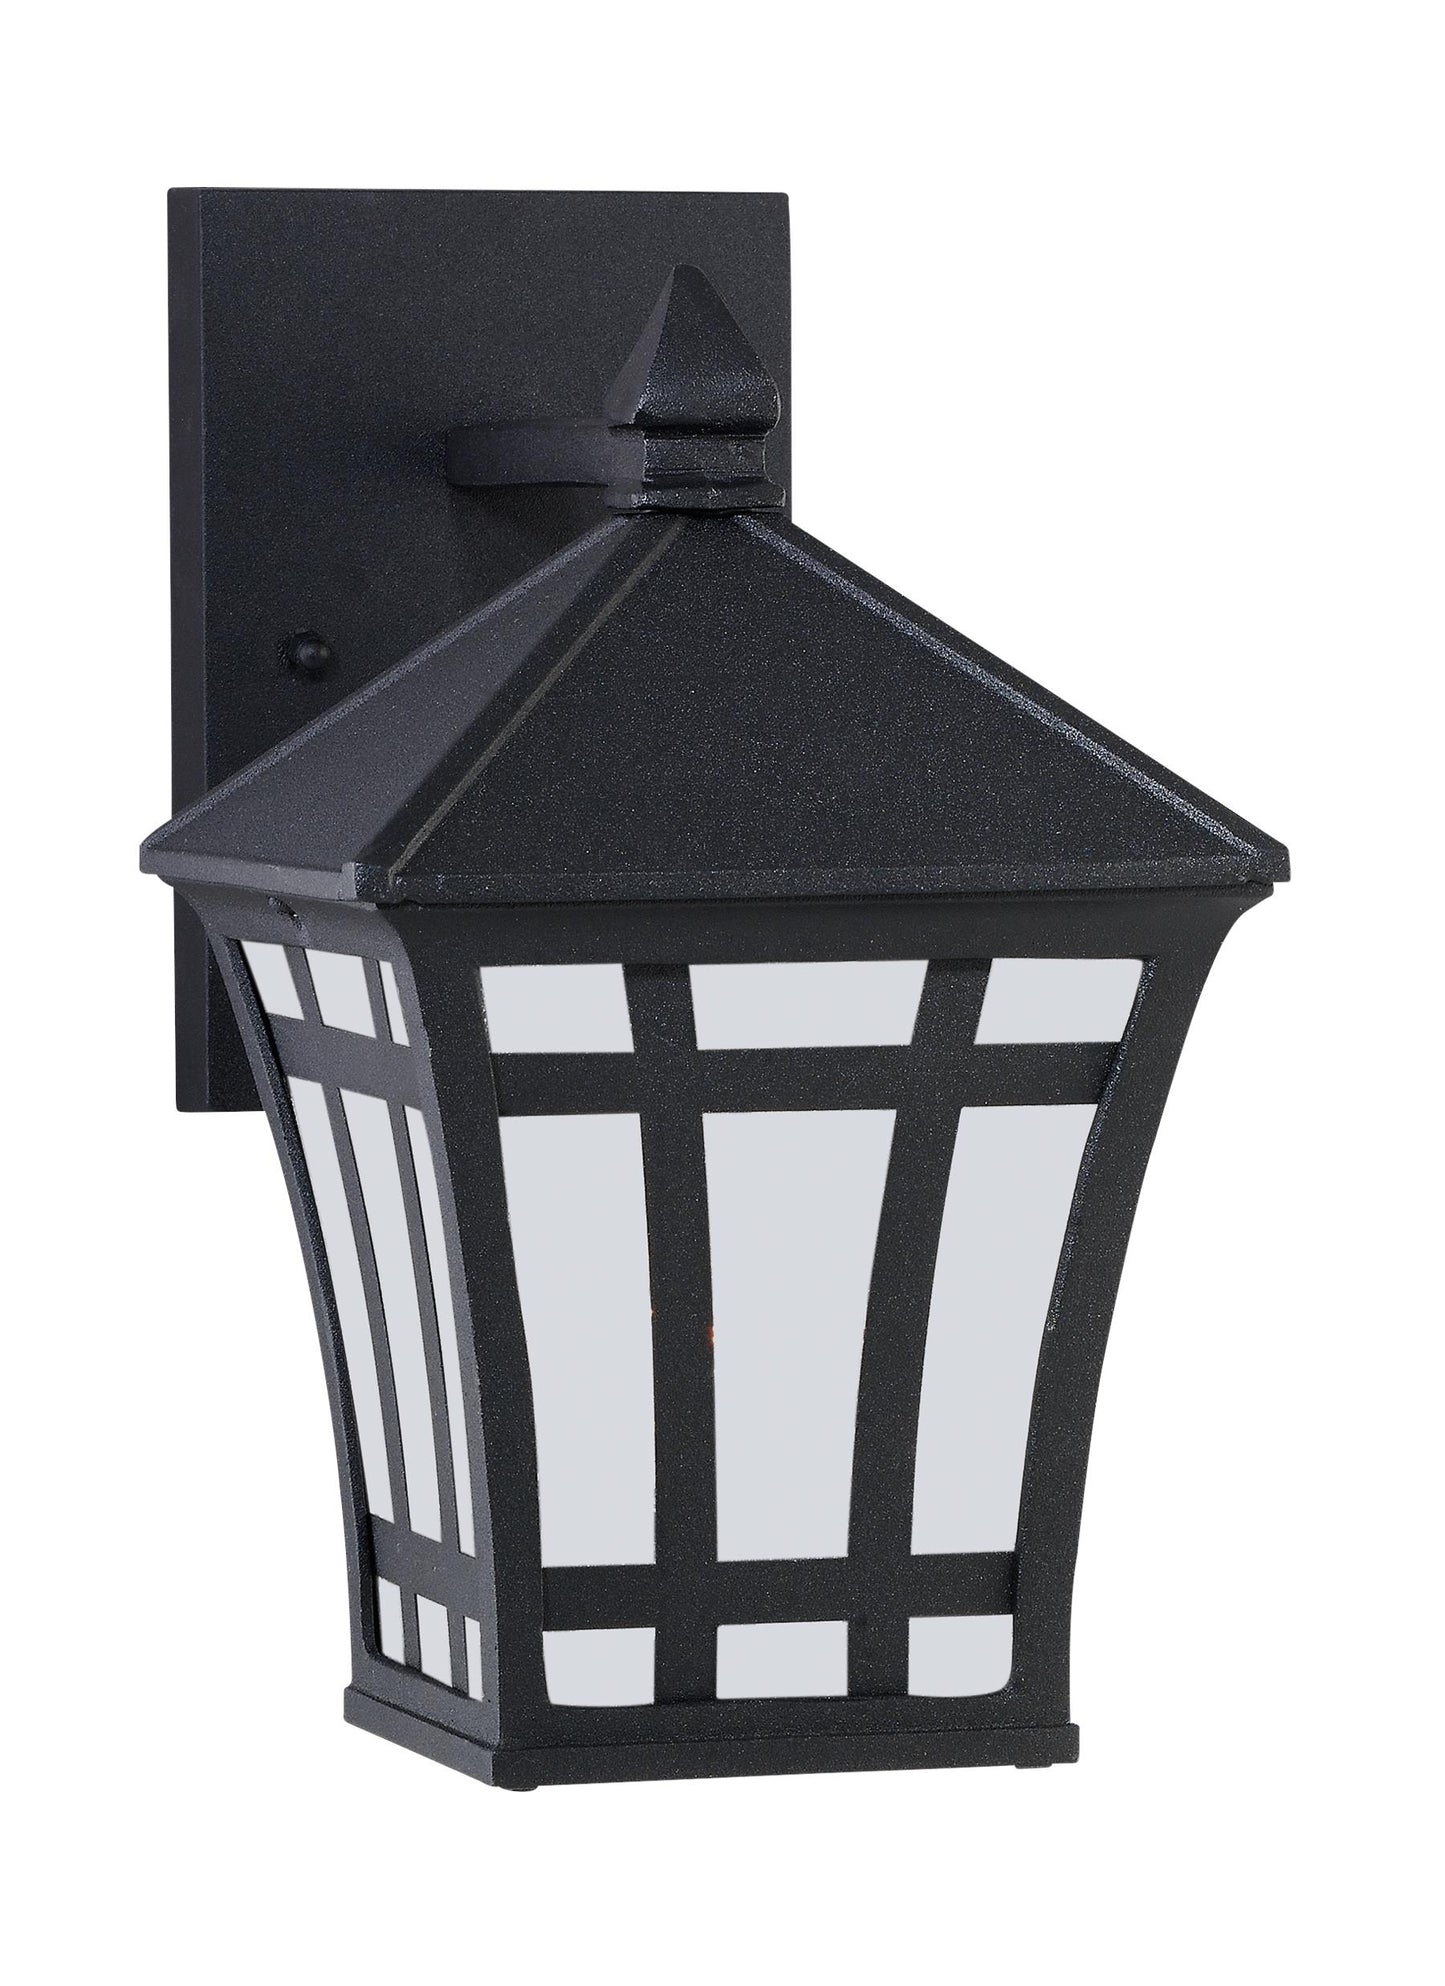 Herrington transitional 1-light outdoor exterior small wall lantern sconce in black finish with etched white glass panels